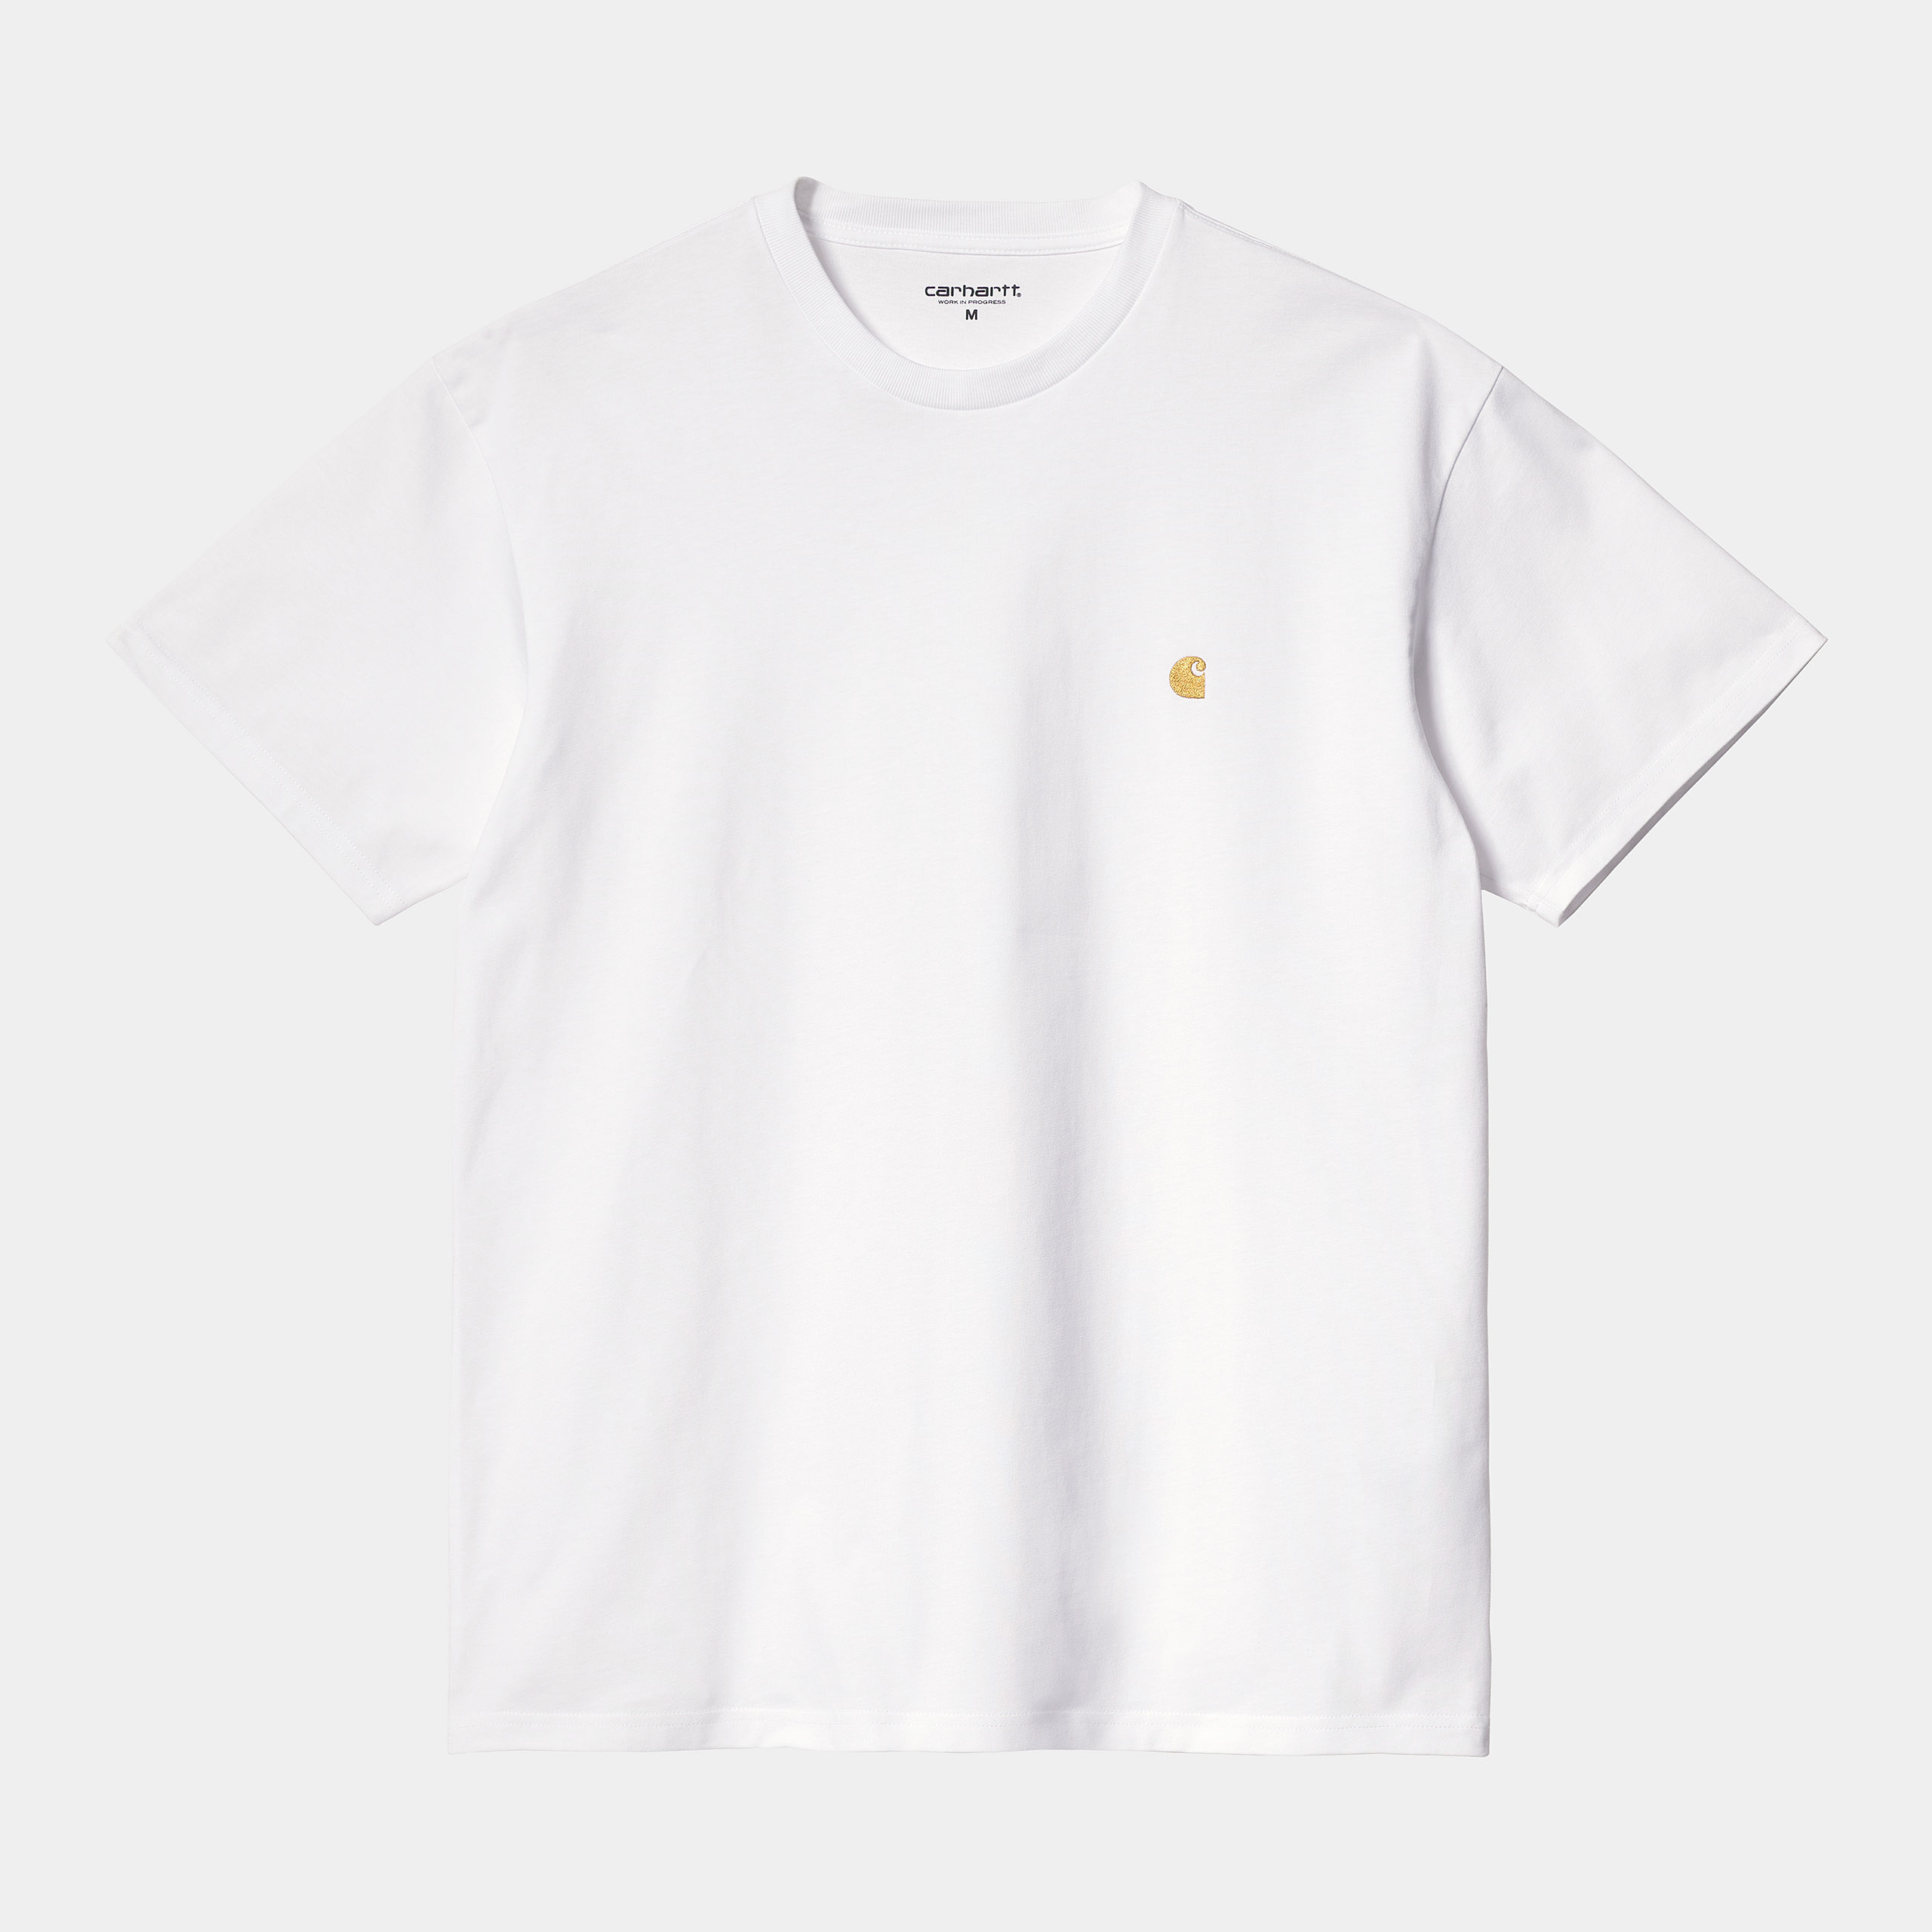 Carhartt WIP - CHASE T-SHIRT  -  White/Gold